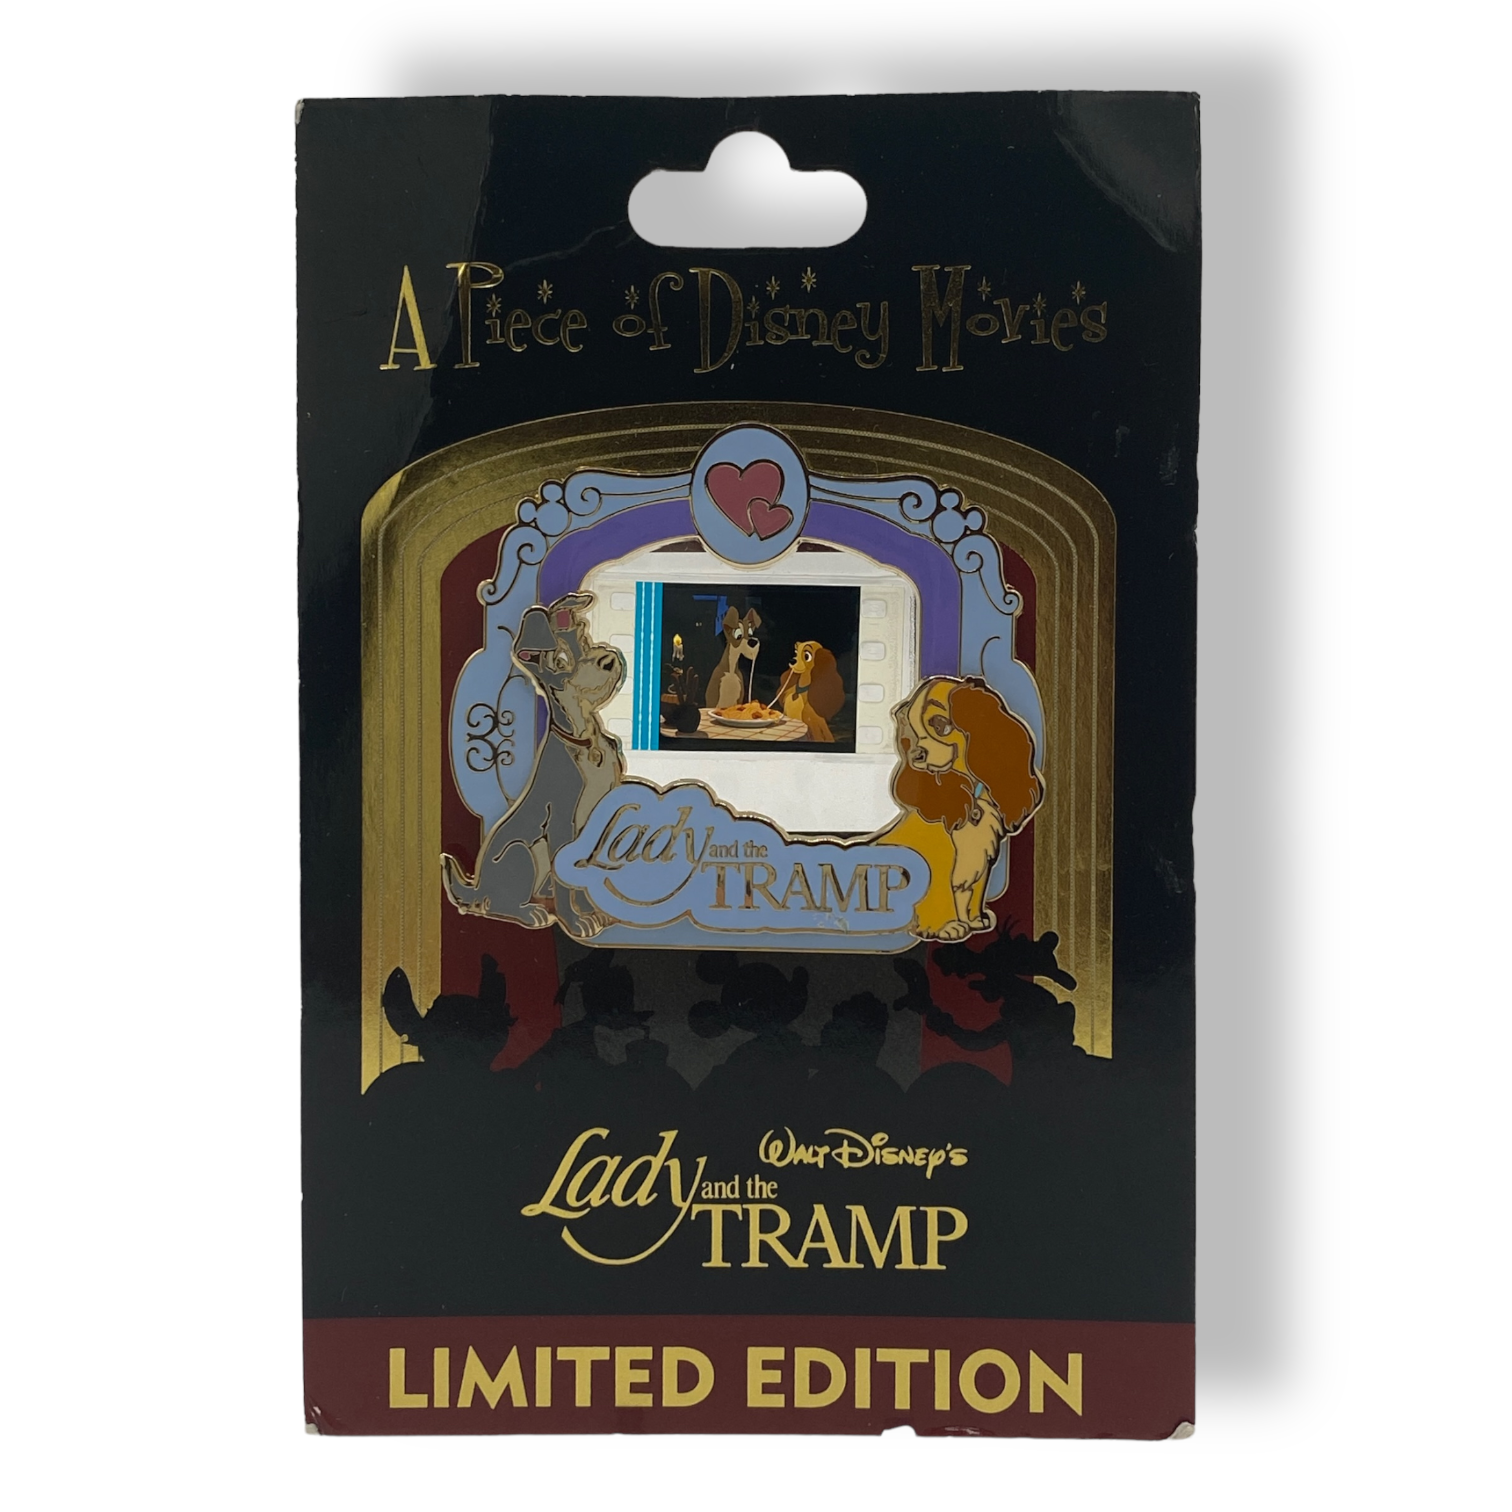 Piece of Disney Movies Lady and The Tramp Pin